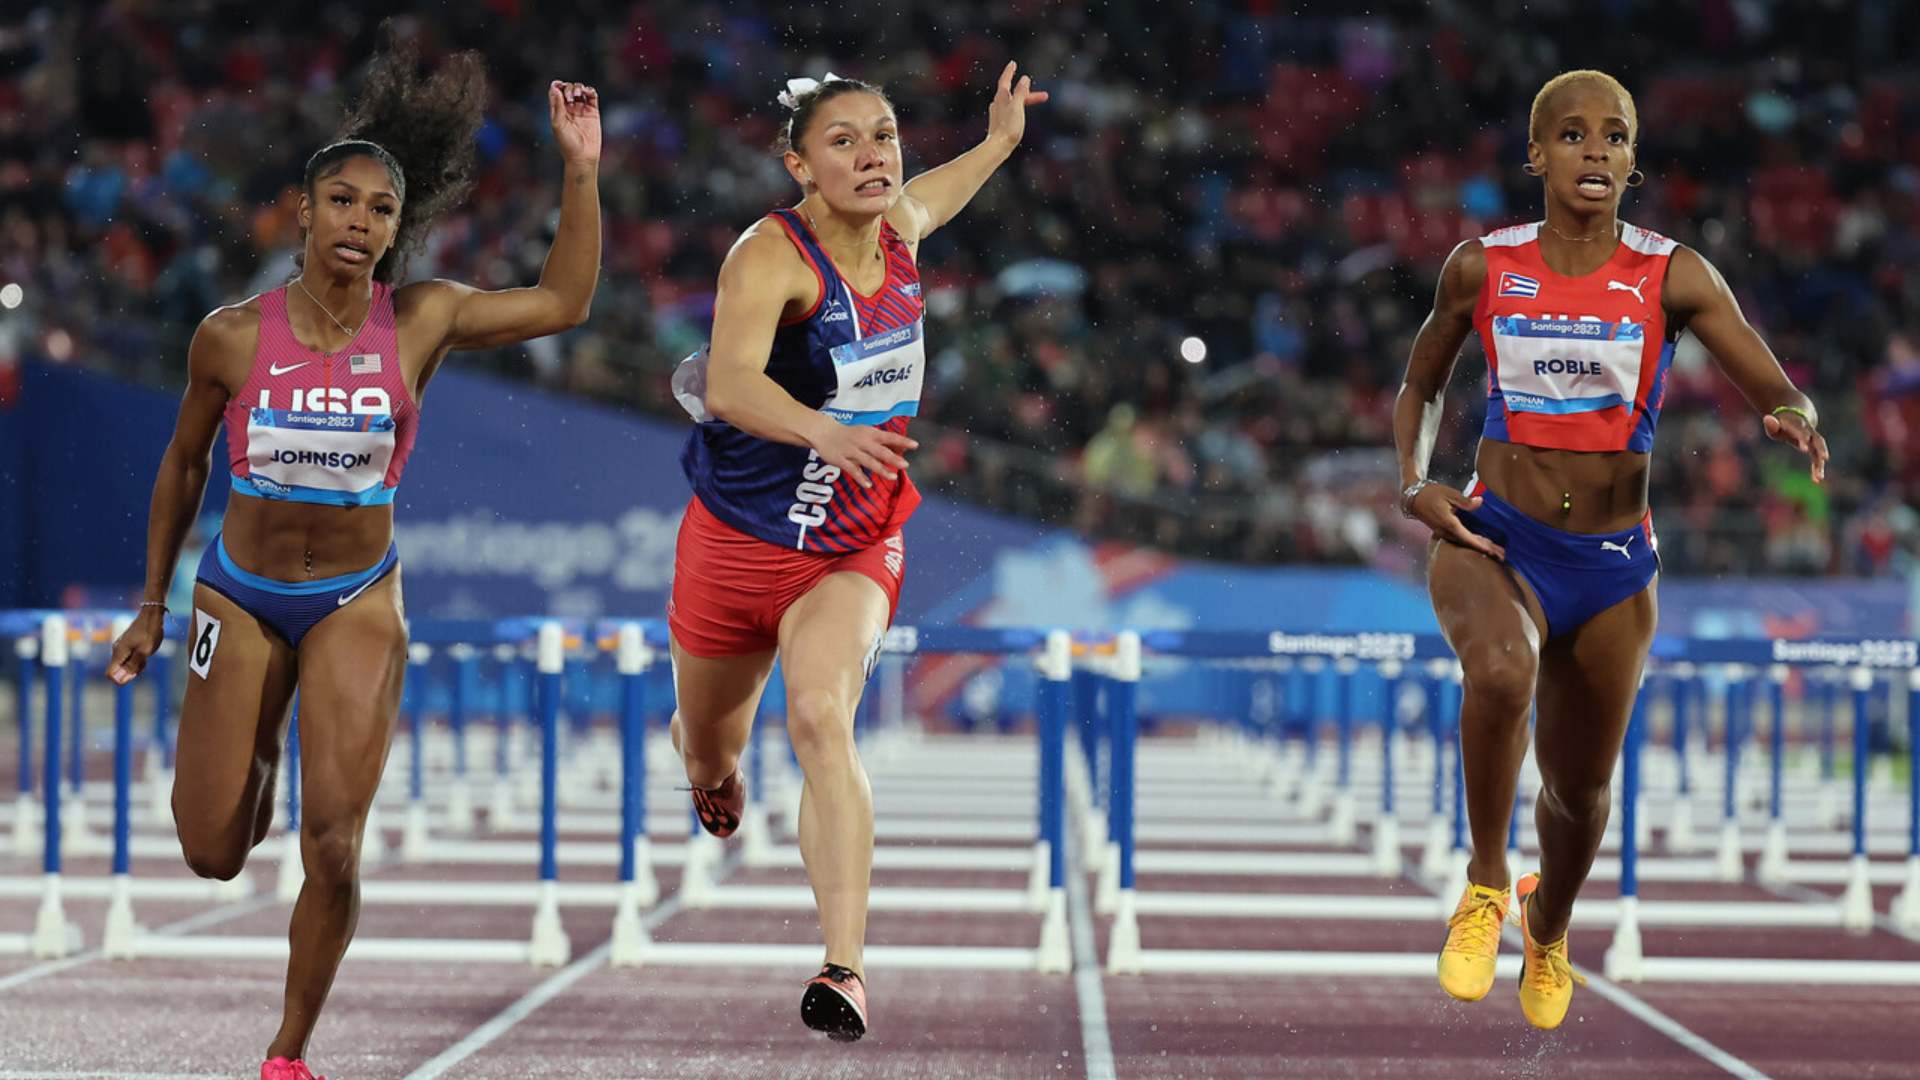 Andrea Vargas retains 100-M hurdles title, securing Costa Rica's first gold